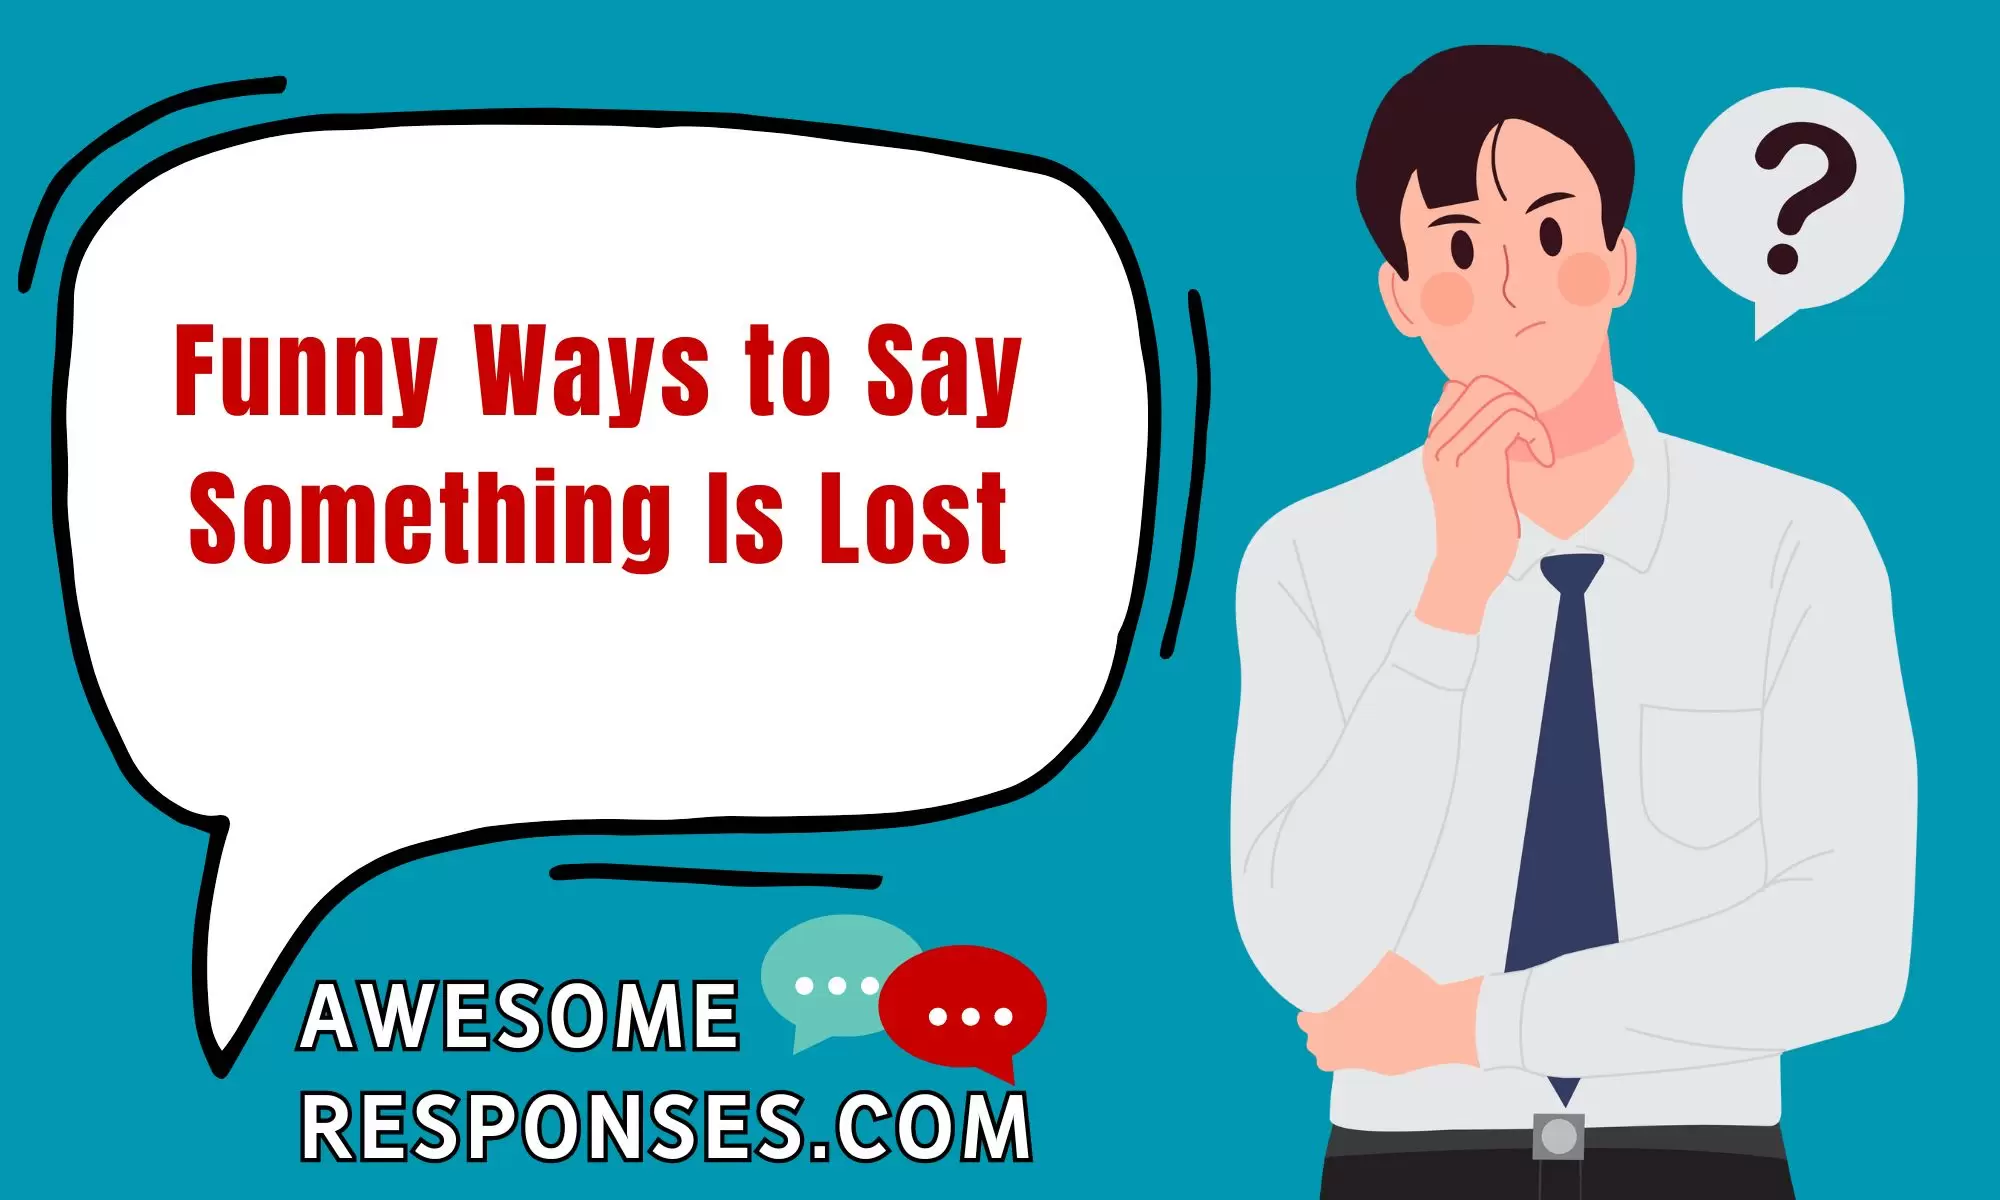 Funny Ways to Say Something Is Lost